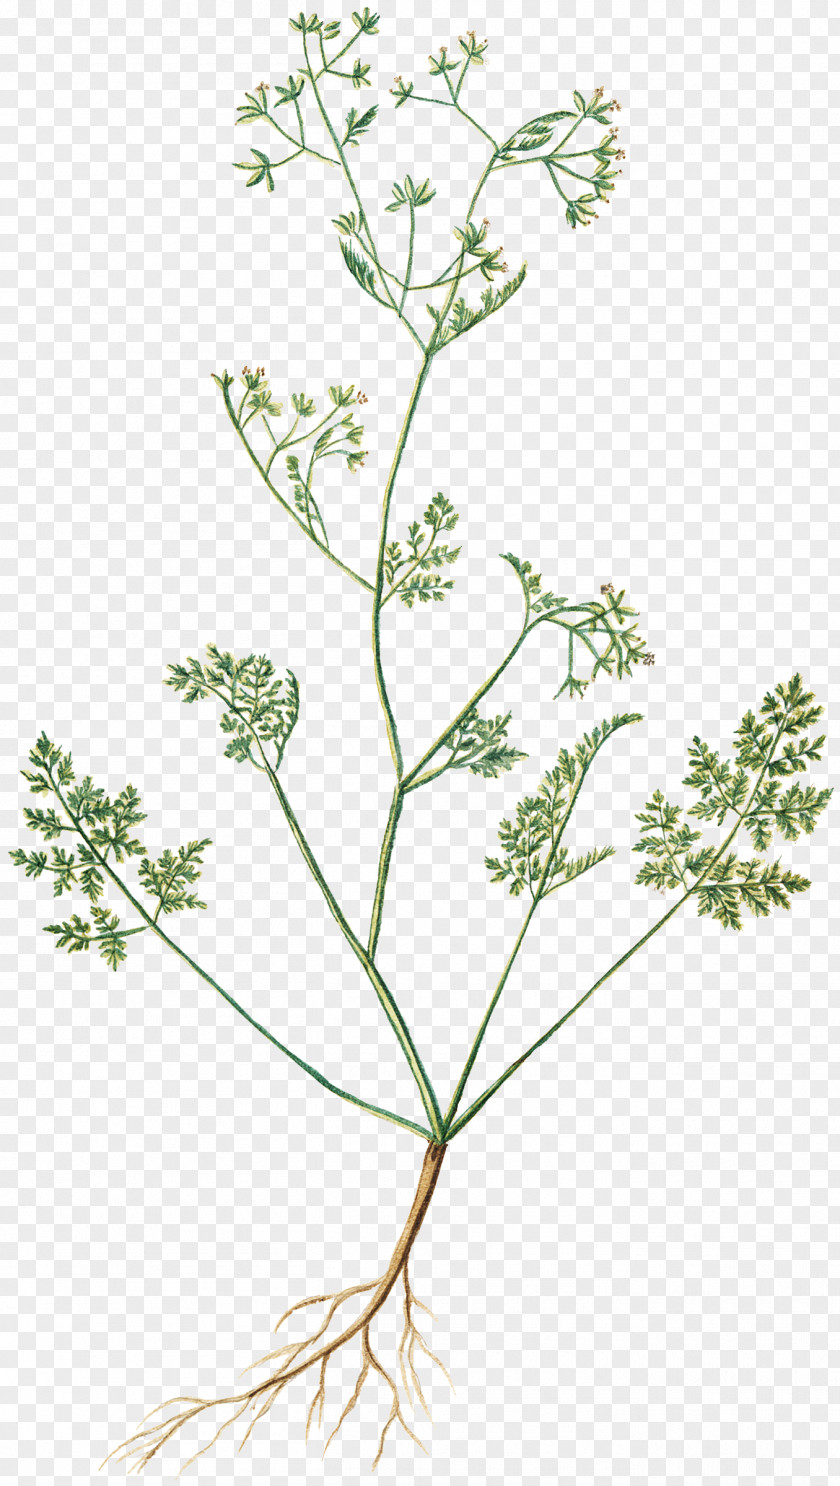 Parsley Cow Chervil Flower Cicely Herb PNG